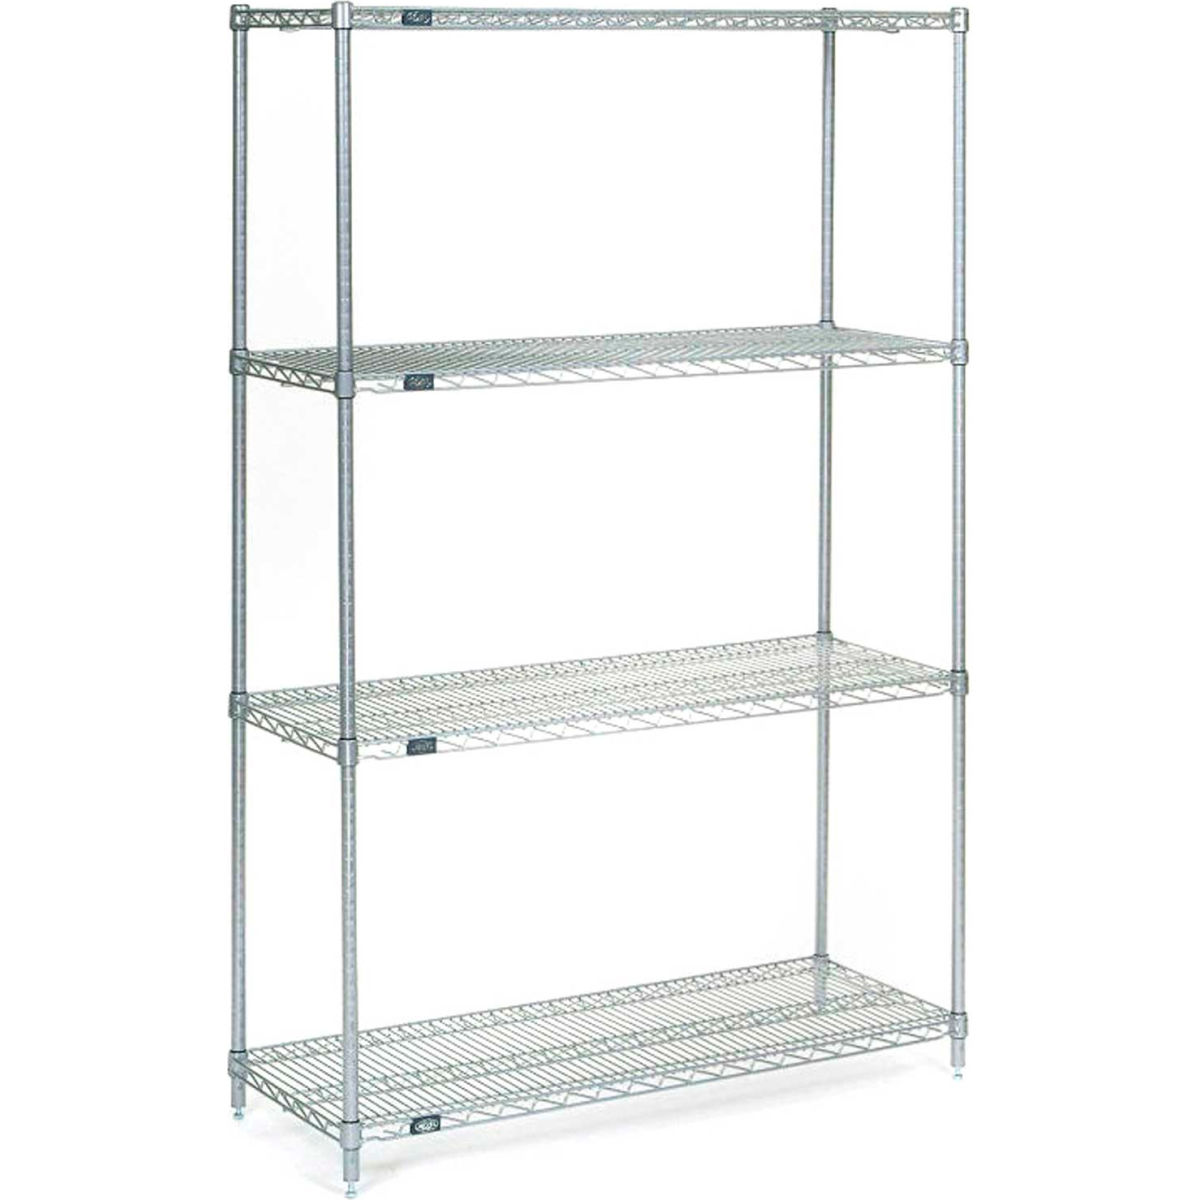 Picture of Global Industrial 14247S 74 x 24 x 14 in. Nexel Stainless Steel Starter Wire Shelving